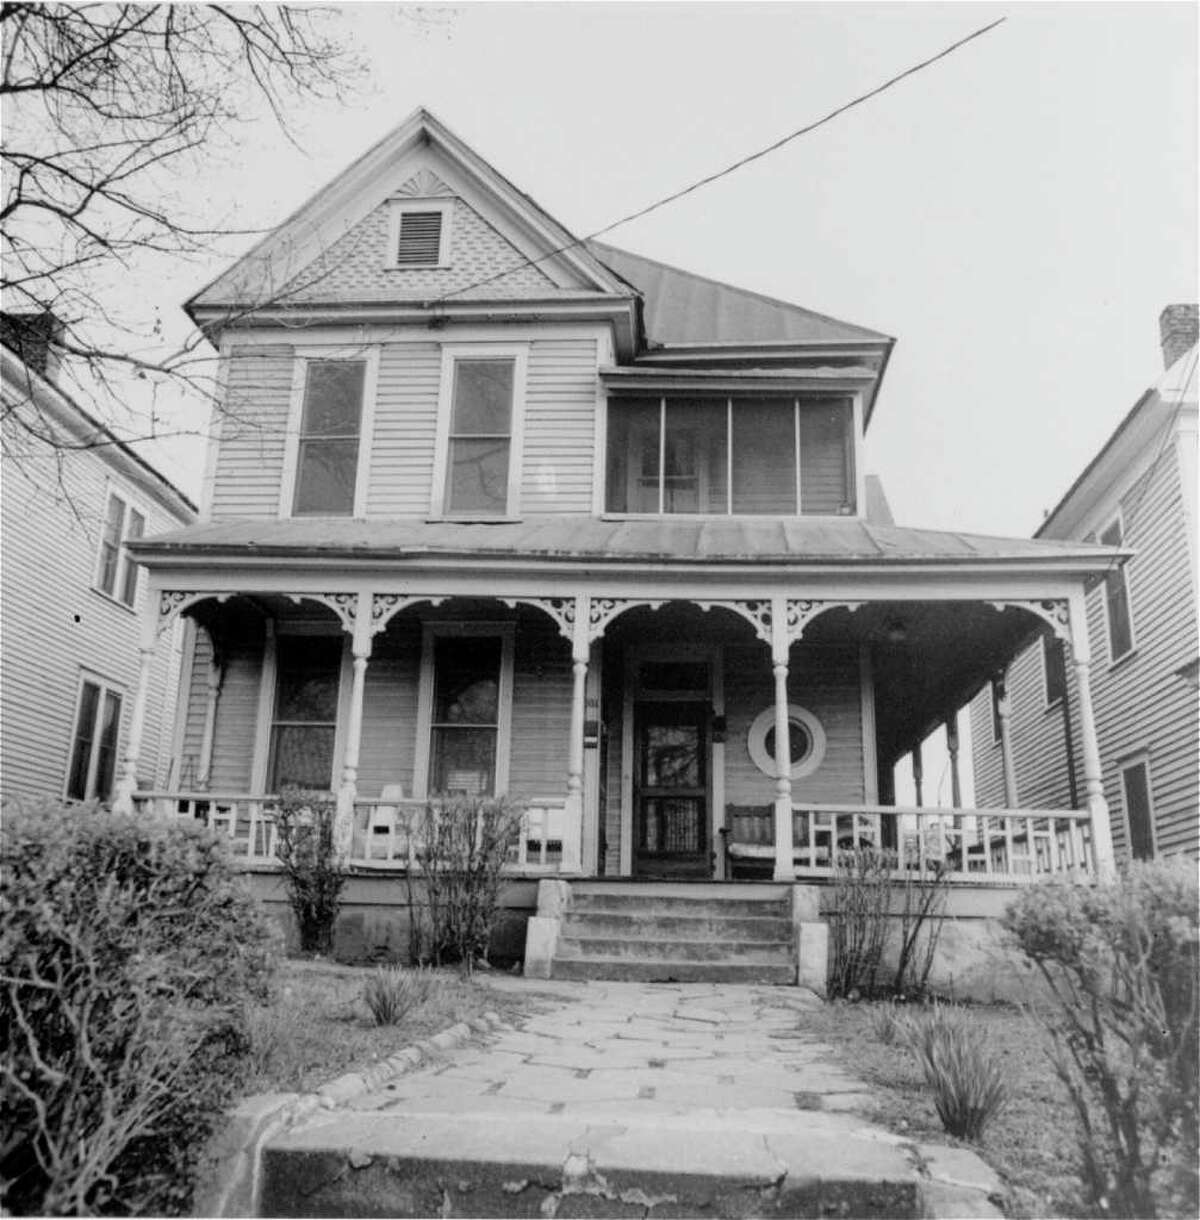 An undated picture of Dr. Martin Luther King, Jr.'s birthplace, 501 Auburn Avenue N.E., Atlanta, Ga. Dr. King was born here, January 15, 1929. (AP Photo)